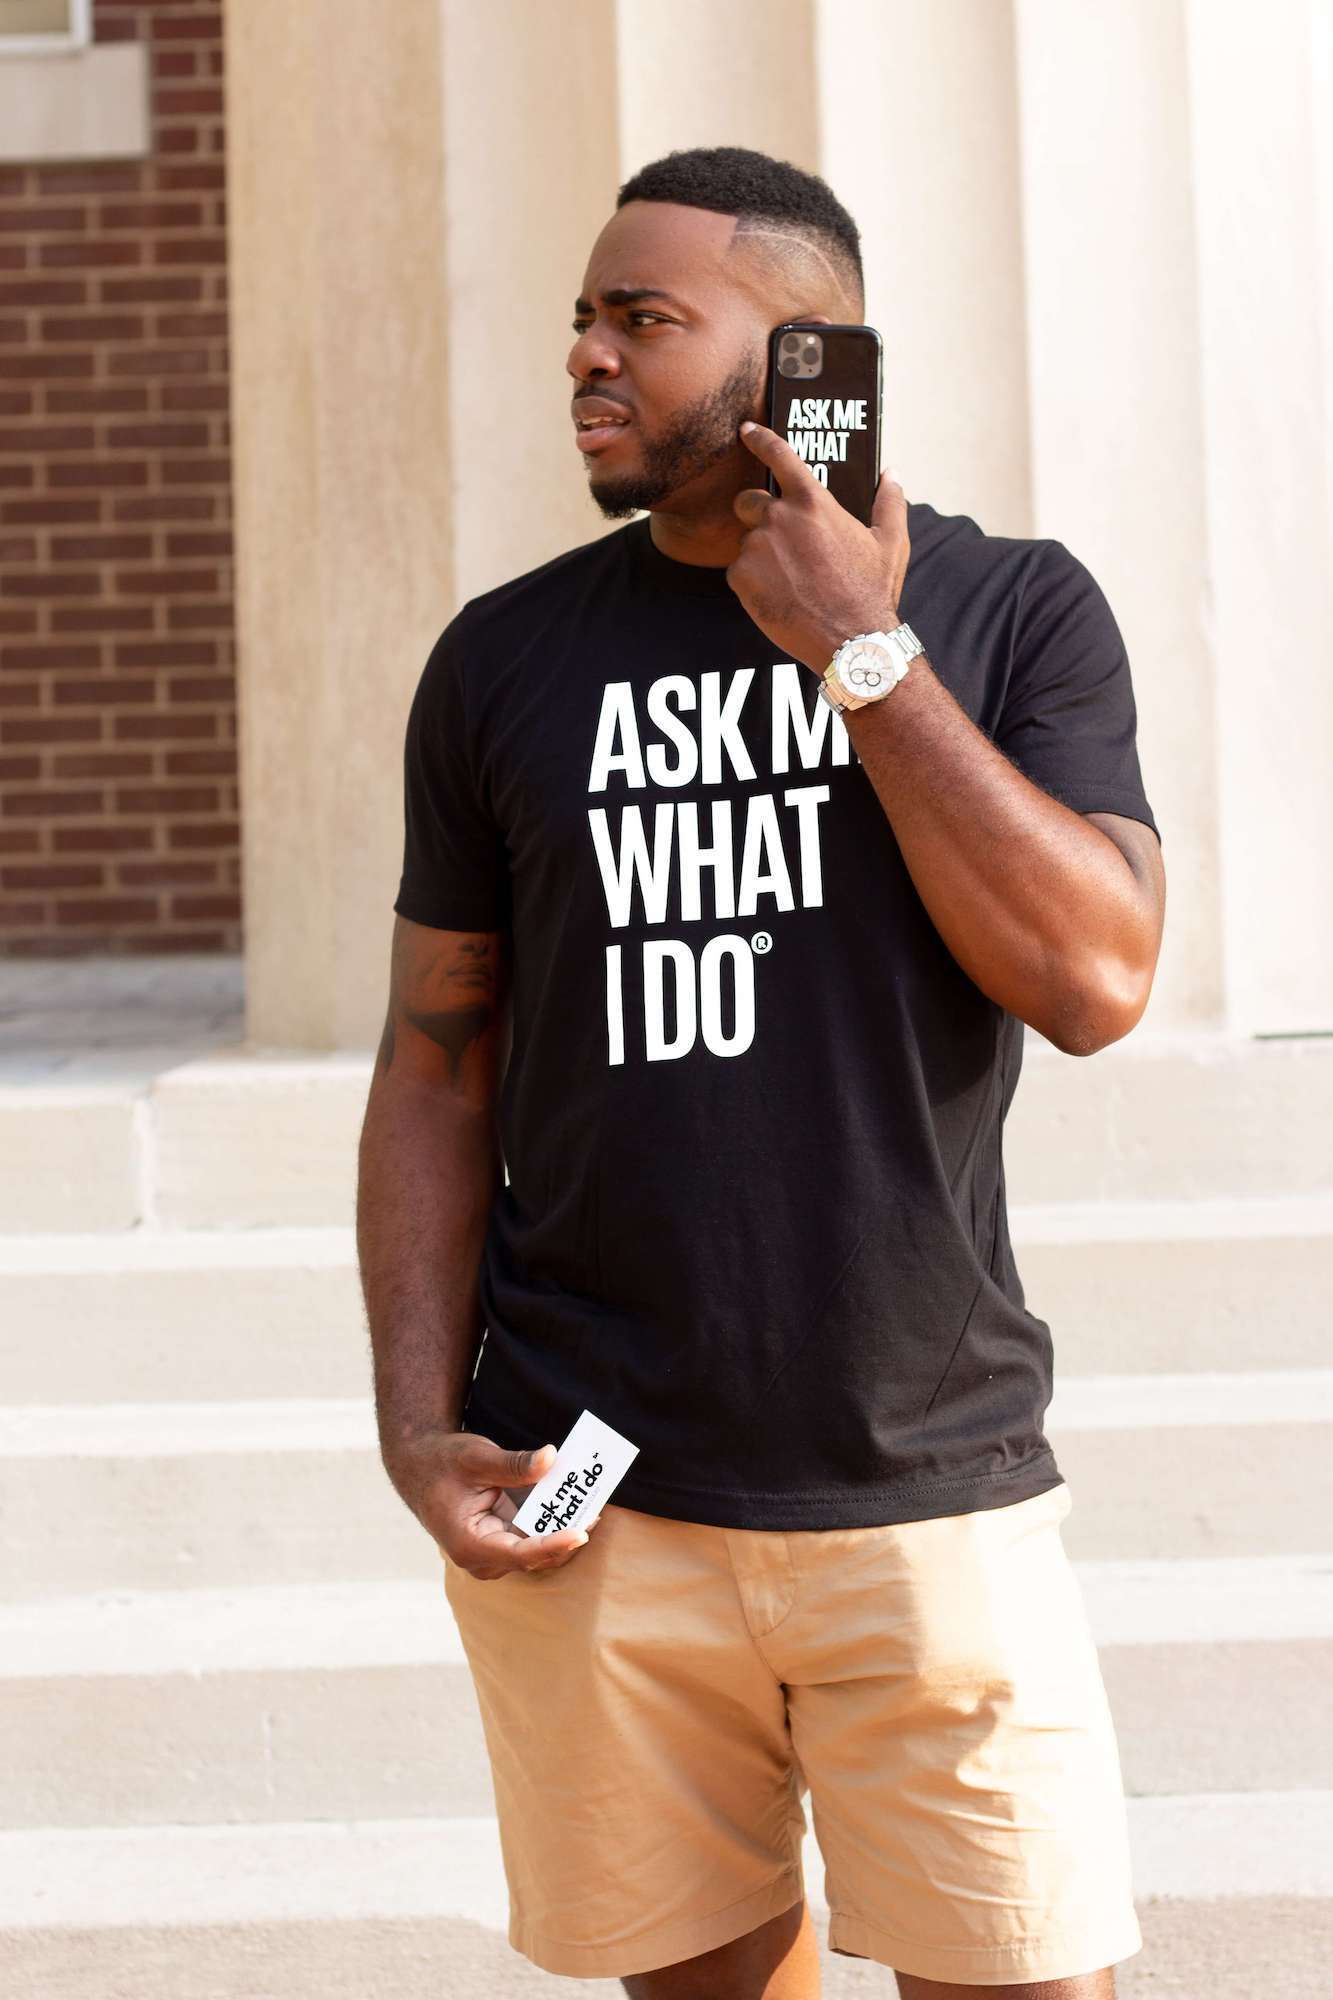 Young Black man wearing black and white "Ask me what I do" T-shirt